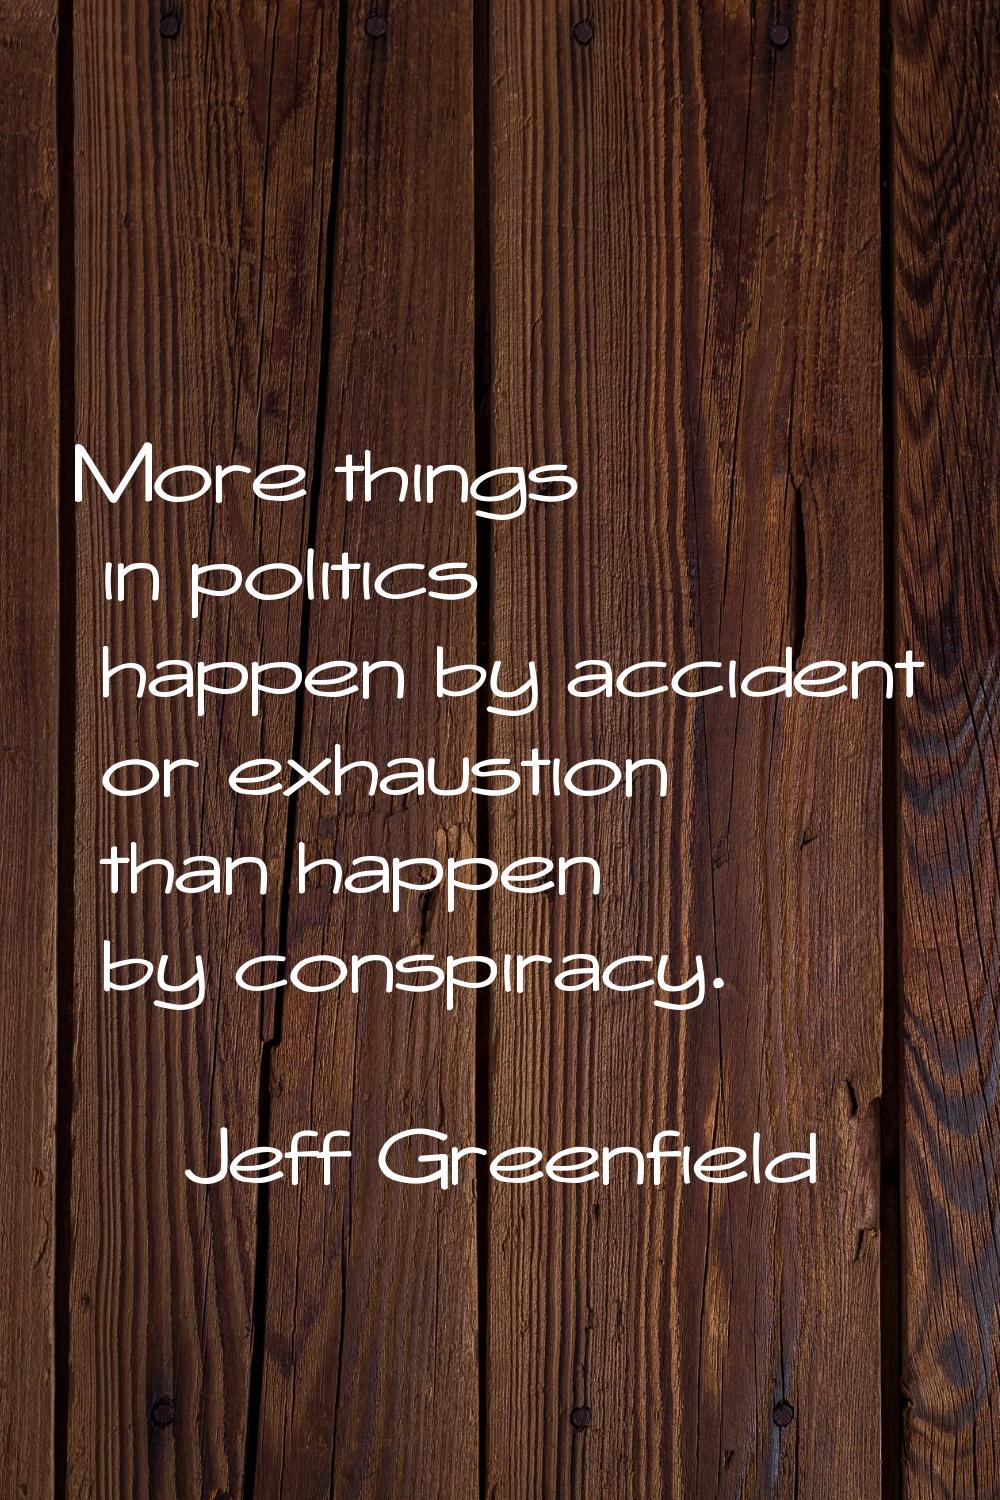 More things in politics happen by accident or exhaustion than happen by conspiracy.